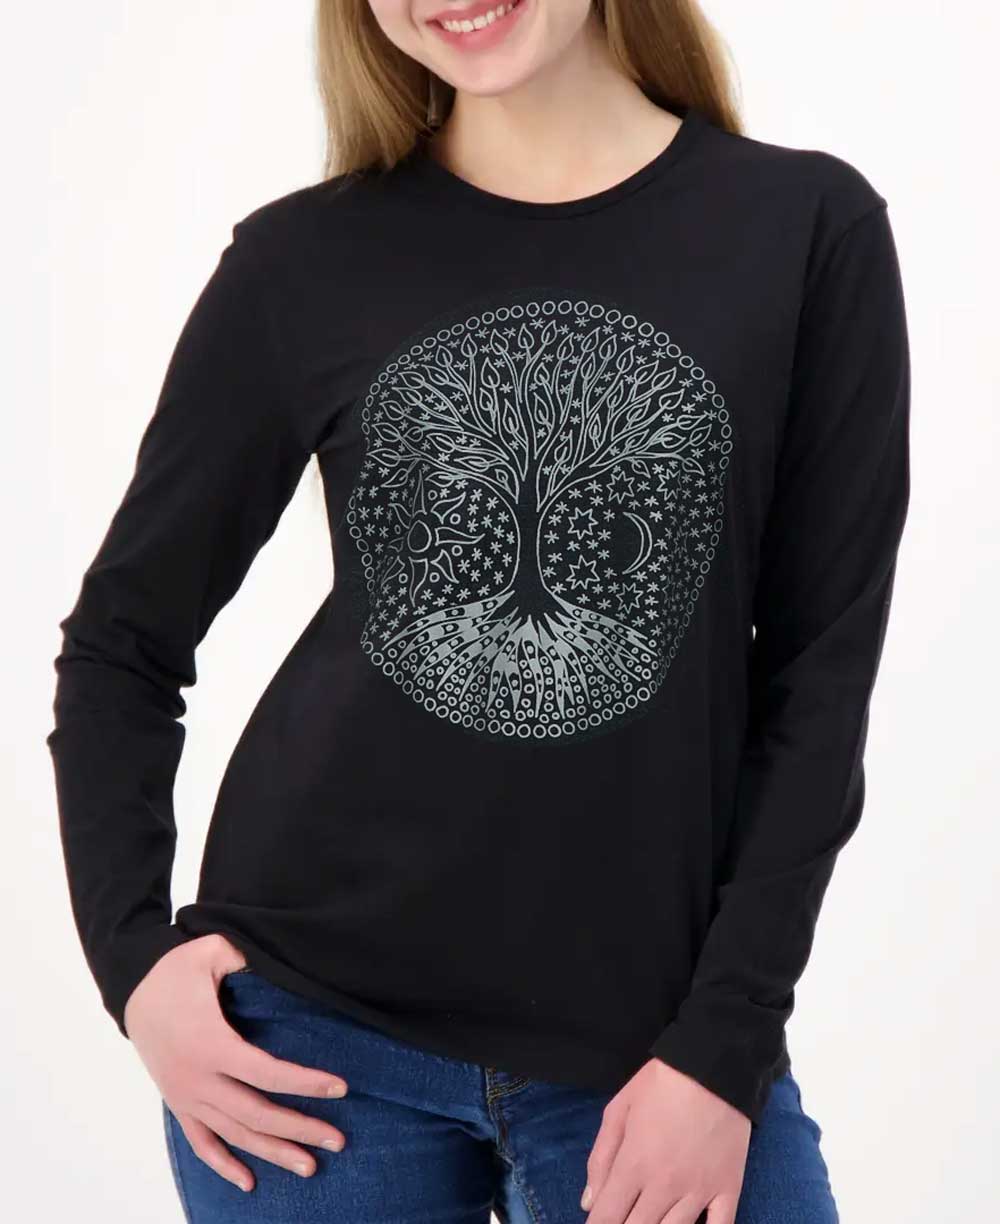 Certified Fairtrade Organic Cotton Tree Of Life Celestial Tee - Shirts & Tops S